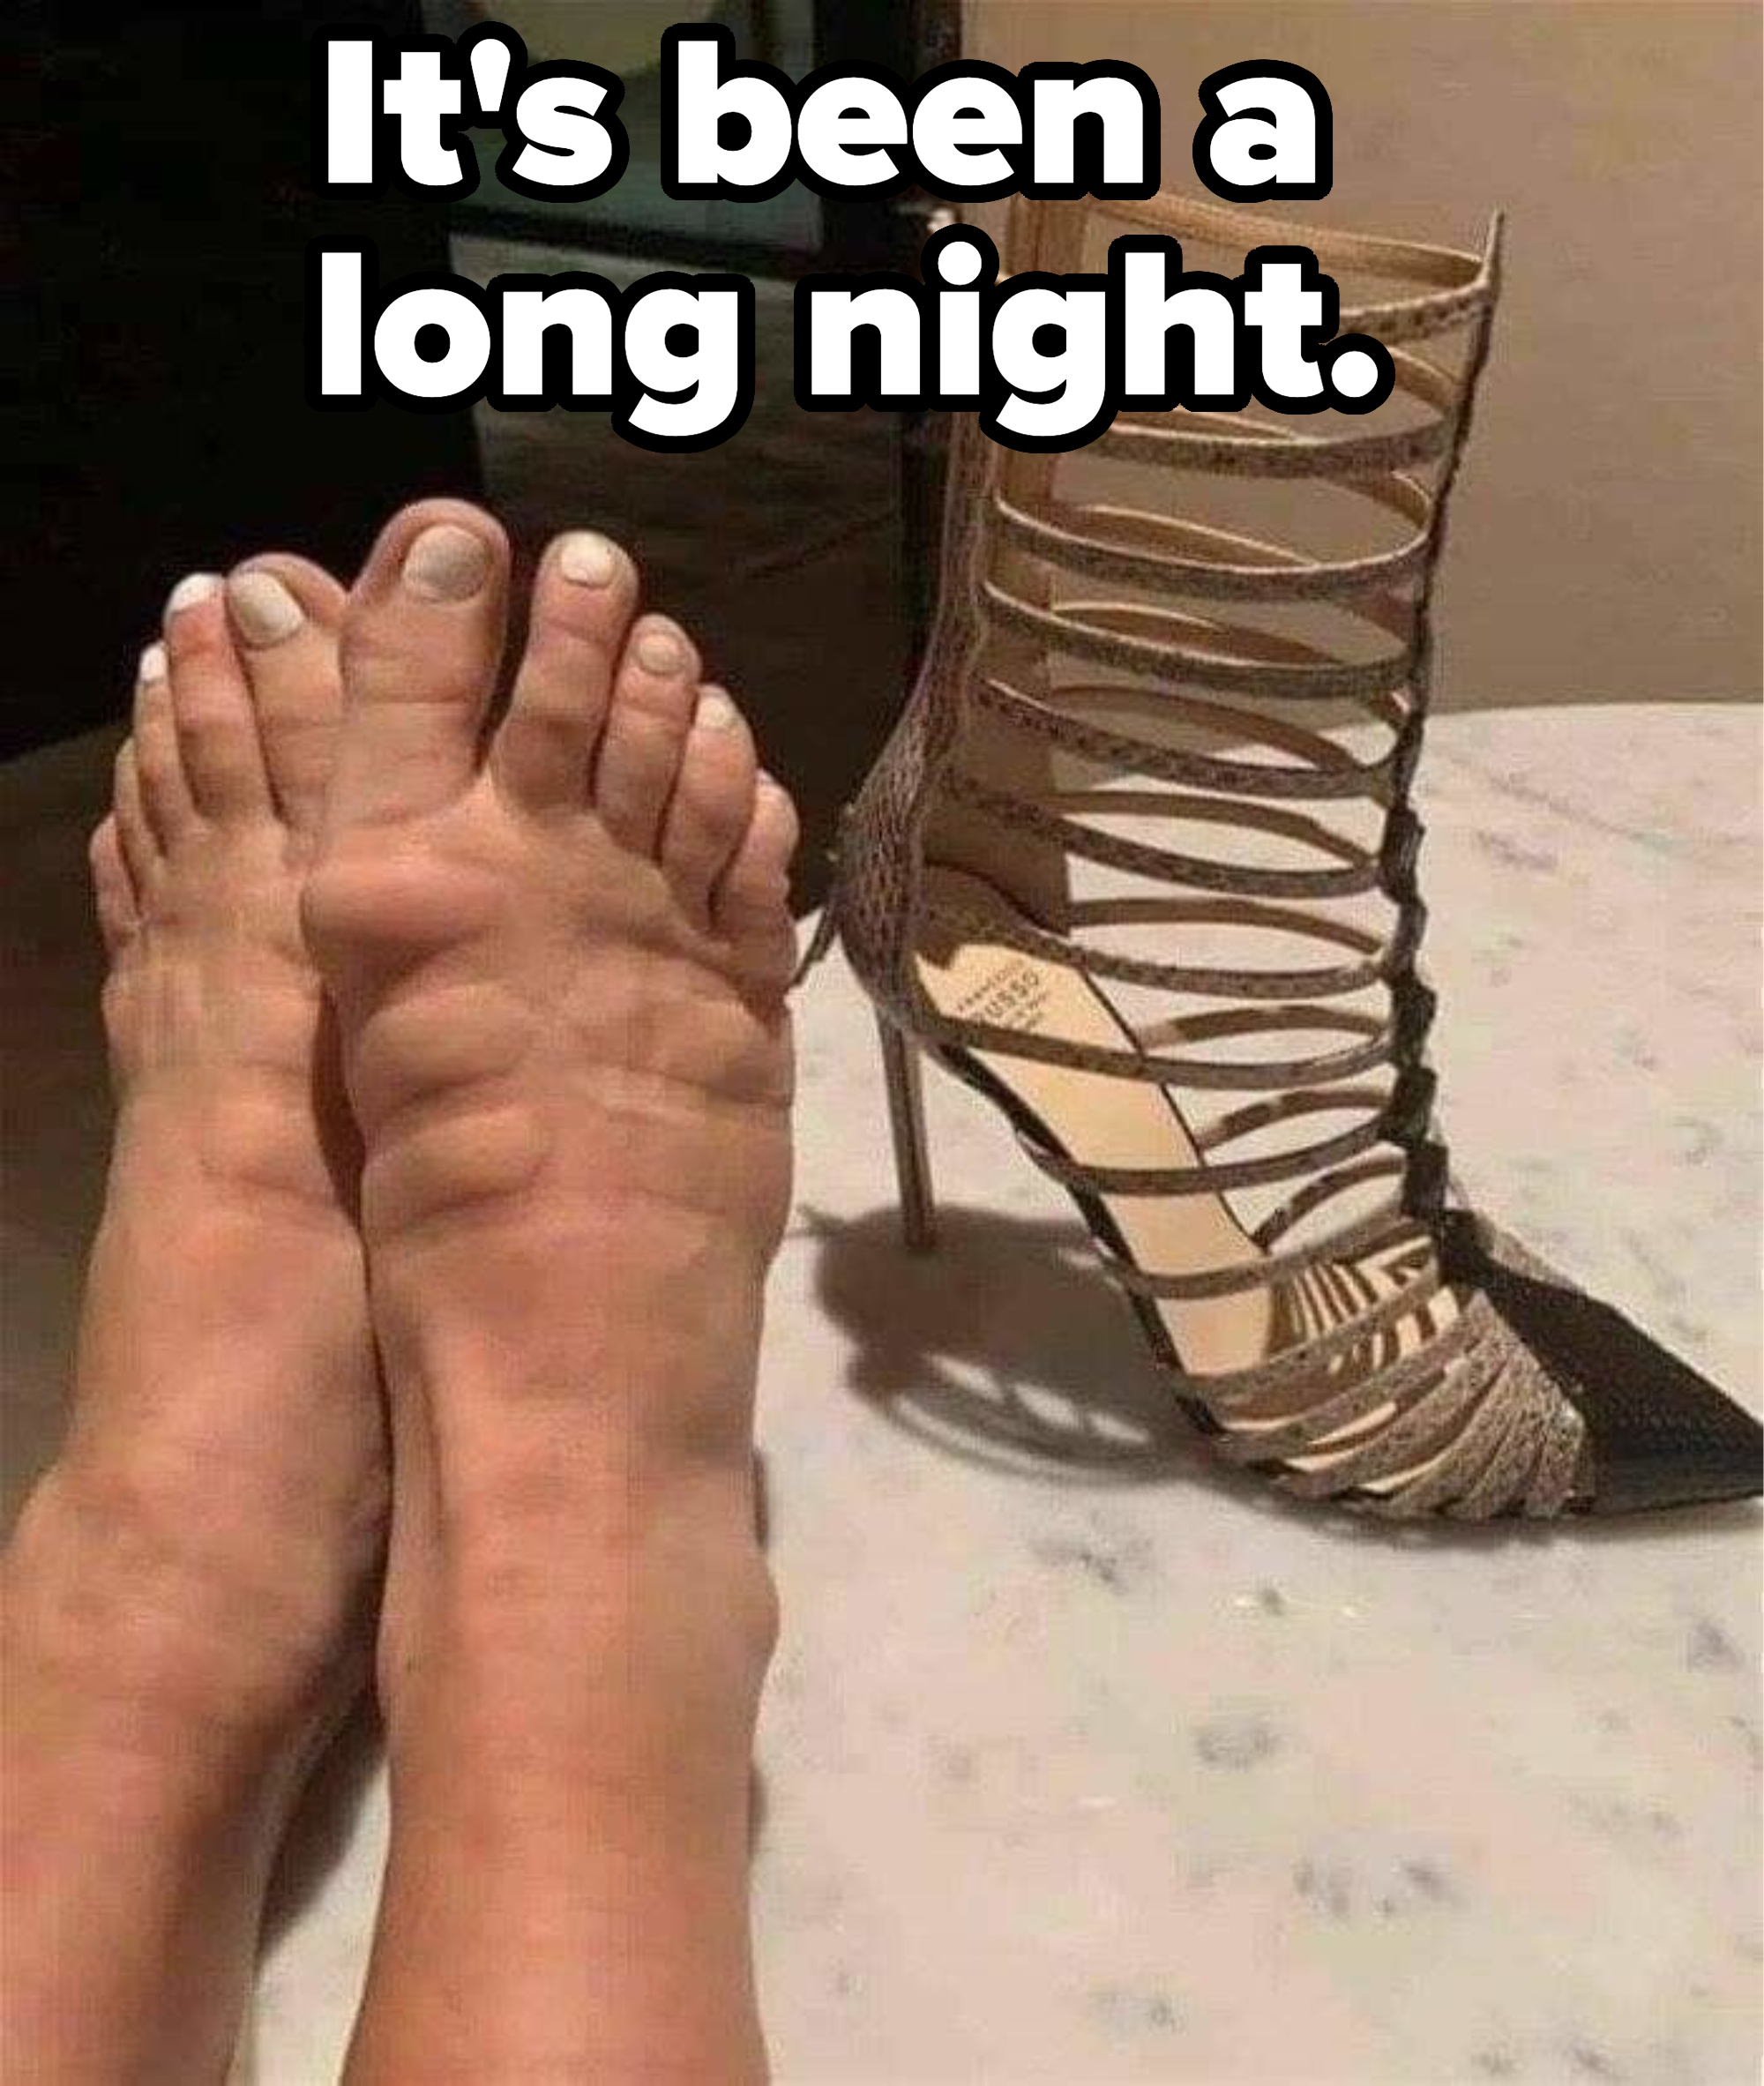 &quot;It&#x27;s been a long night&quot; caption, showing bare feet with deep indentations across the front, next to a pair of uncomfortable boots with rows of thin straps